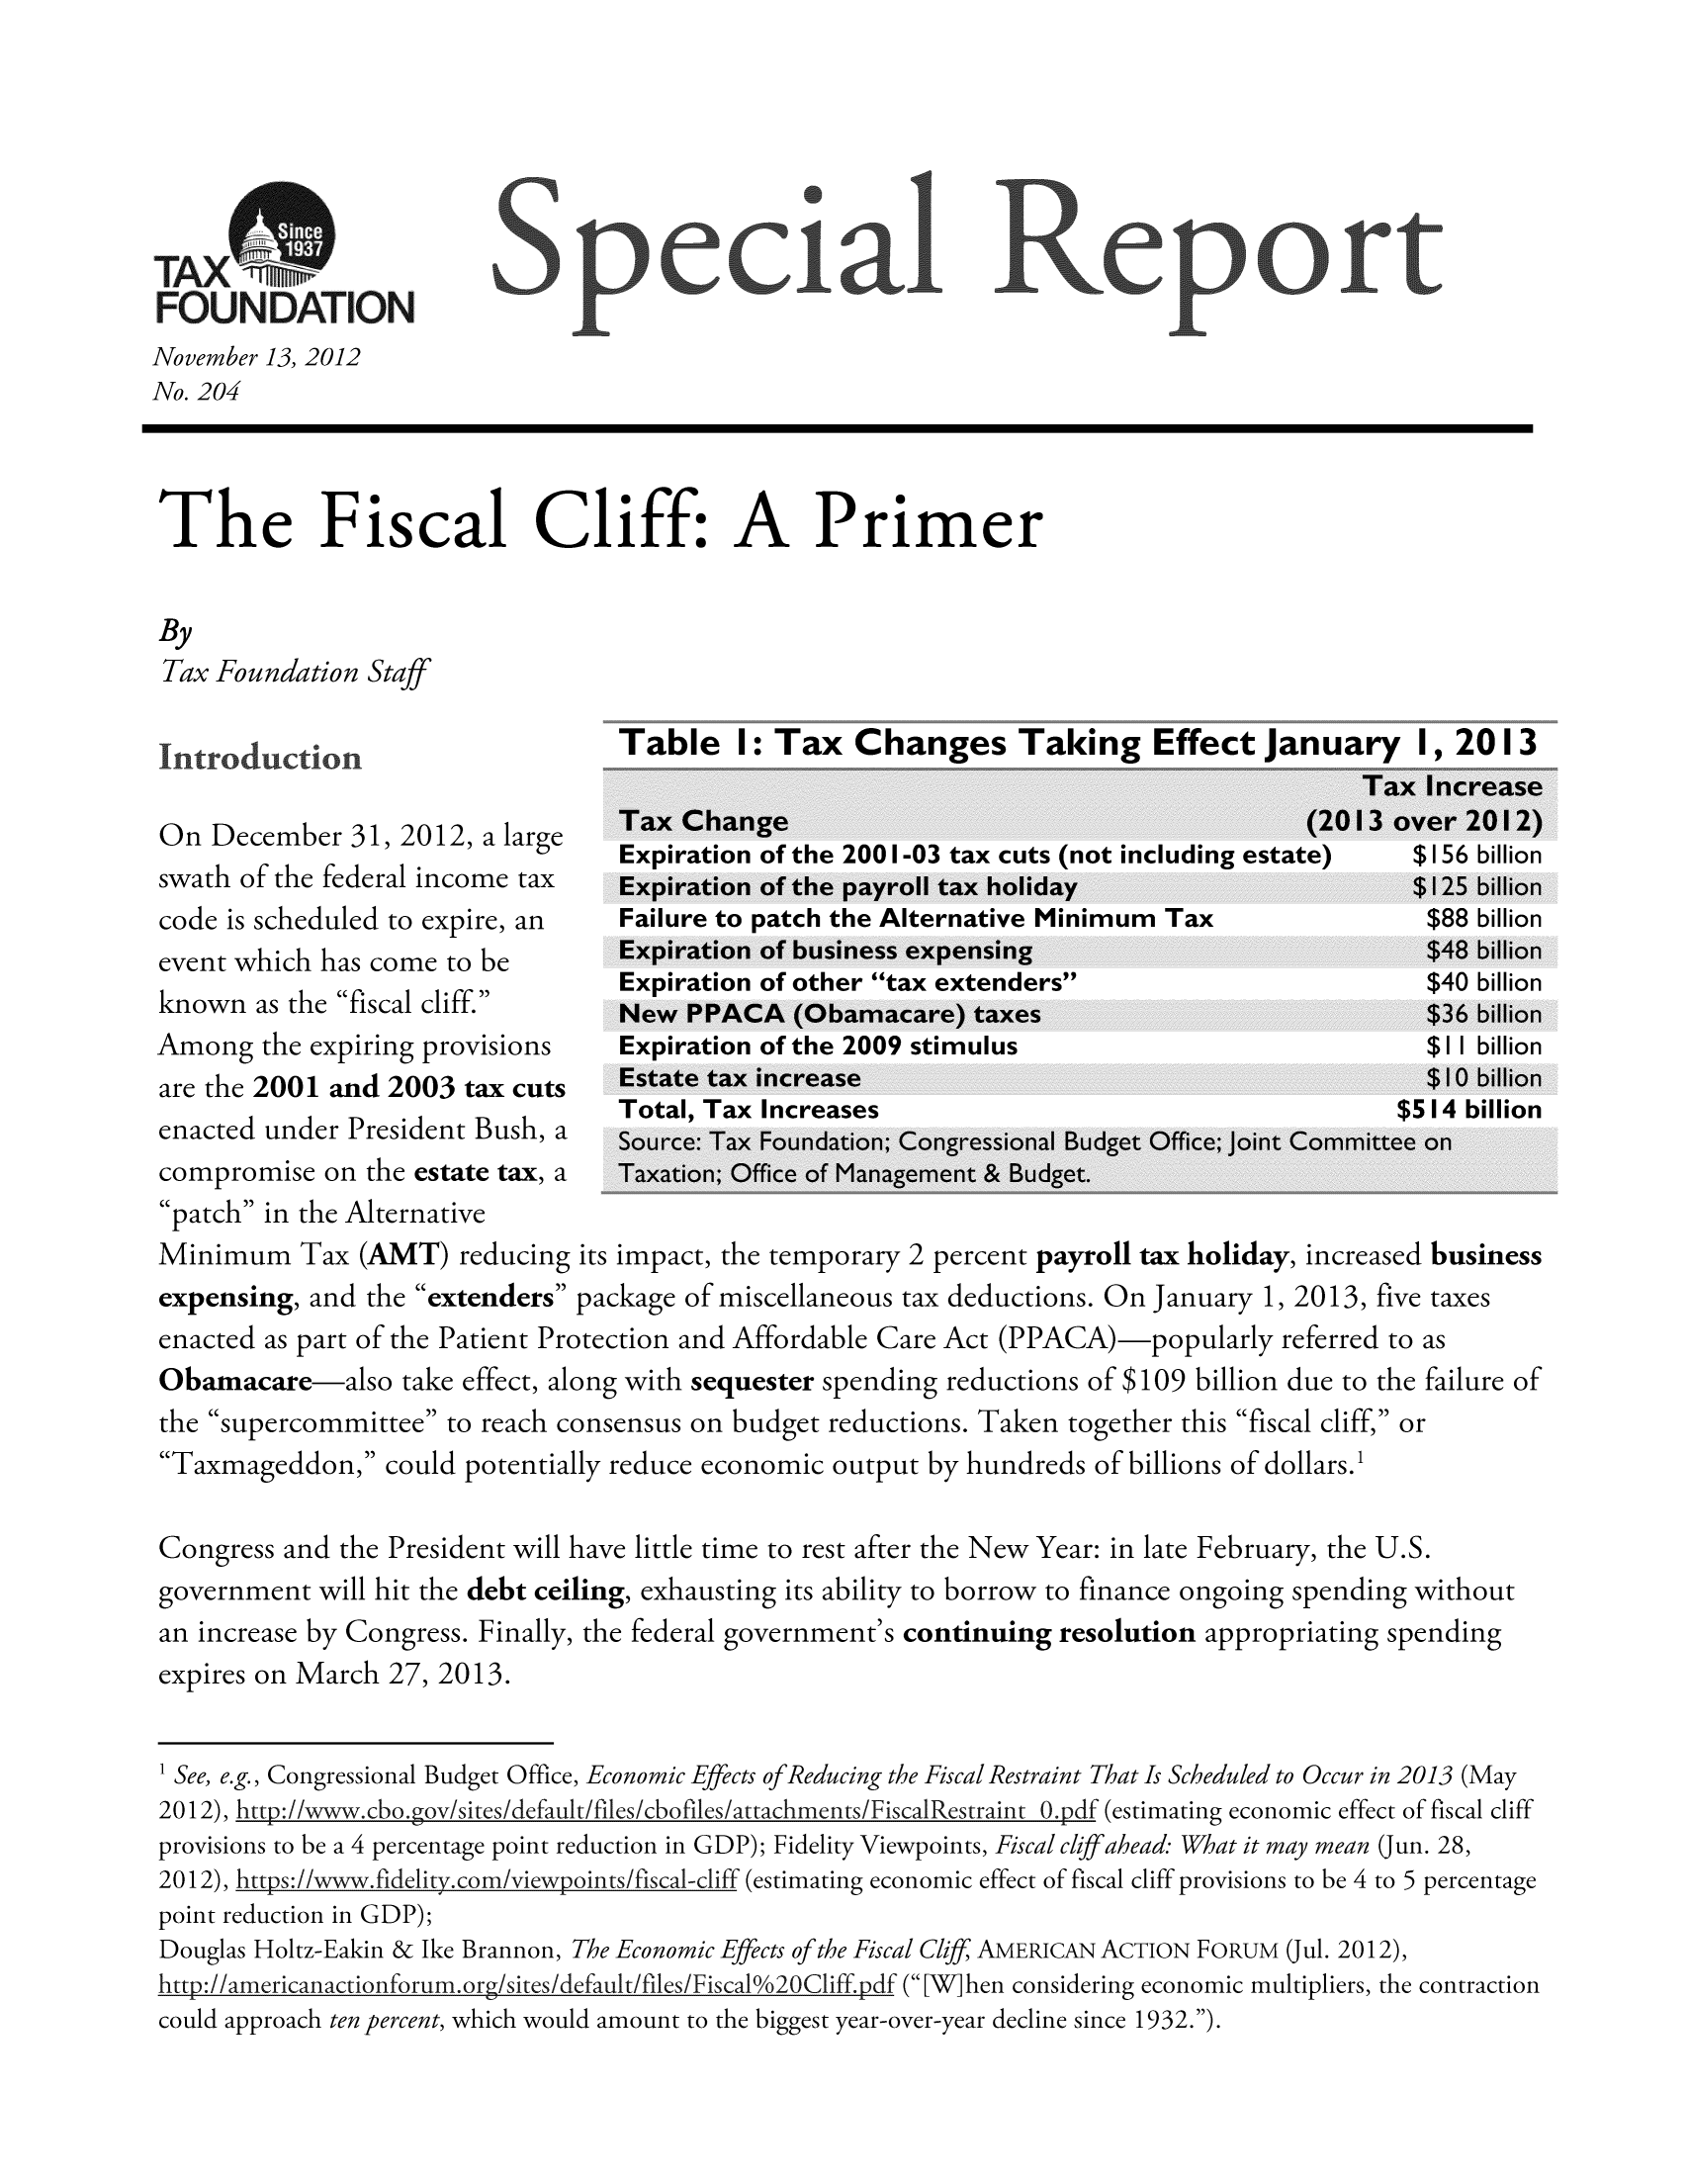 handle is hein.taxfoundation/srcaexz0001 and id is 1 raw text is: FOUNDATION
November 13, 2012
No. 204
The Fiscal Cliff: A Primer
By
Tax Foundation Staff
Table    I: Tax Changes Taking Effect January                I, 2013
Tax Increase
On December 31,2012, a large       Tax Change                                          (2013 over 2012)
lt'       a      Expiration of the 2001-03 tax cuts (not including estate)   $156 billion
swath of the federal income tax    Expiration of the payroll tax holiday                       $125 billion
code is scheduled to expire, an    Failure to patch the Alternative Minimum Tax                 $88 billion
event which has come to be         Expiration of business expensing                             $48 billion
Expiration of other tax extenders                          $40 billion
known as the fiscal cliff.       New PPACA (Obamacare) taxes                                  $36 billion
Among the expiring provisions      Expiration of the 2009 stimulus                              $11 billion
are the 2001 and 2003 tax cuts     Estate tax increase                                          $10 billion
Total, Tax Increases                                       $514 billion
enacted under President Bush, a Source: Tax Foundation; Congressional Budget Office; joint Committee on
compromise on the estate tax, a    Taxation; Office of Management & Budget.
patch in the Alternative
Minimum Tax (AMT) reducing its impact, the temporary 2 percent payroll tax holiday, increased business
expensing, and the extenders package of miscellaneous tax deductions. On January 1, 2013, five taxes
enacted as part of the Patient Protection and Affordable Care Act (PPACA)-popularly referred to as
Obamacare also take effect, along with sequester spending reductions of $109 billion due to the failure of
the supercommittee to reach consensus on budget reductions. Taken together this fiscal cliff, or
Taxmageddon, could potentially reduce economic output by hundreds of billions of dollars.1
Congress and the President will have little time to rest after the New Year: in late February, the U.S.
government will hit the debt ceiling, exhausting its ability to borrow to finance ongoing spending without
an increase by Congress. Finally, the federal government's continuing resolution appropriating spending
expires on March 27, 2013.
1 See, e.g., Congressional Budget Office, Economic Effects of Reducing the Fiscal Restraint That Is Scheduled to Occur in 2013 (May
2012), htt/wwwcbo gov/ites/default/files/cbofiles/ttachments/FiscalRestraint 0 pdf (estimating economic effect of fiscal cliff
provisions to be a 4 percentage point reduction in GDP); Fidelity Viewpoints, Fiscal clff ahead: What it may mean (Jun. 28,
2012), htps:/wwfidelity corn/viewpoints/fisca1-cliff (estimating economic effect of fiscal cliff provisions to be 4 to 5 percentage
point reduction in GDP);
Douglas Holtz-Eakin & Ike Brannon, The Economic Effects of the Fiscal Clif, AMERICAN ACTION FORUM (Jul. 2012),
http:/americanactionforum org/sites/default/files/Fisca 10o2OCliff pdf ( [Wihen considering economic multipliers, the contraction

could approach ten percent, which would amount to the biggest year-over-year decline since 1932.).


